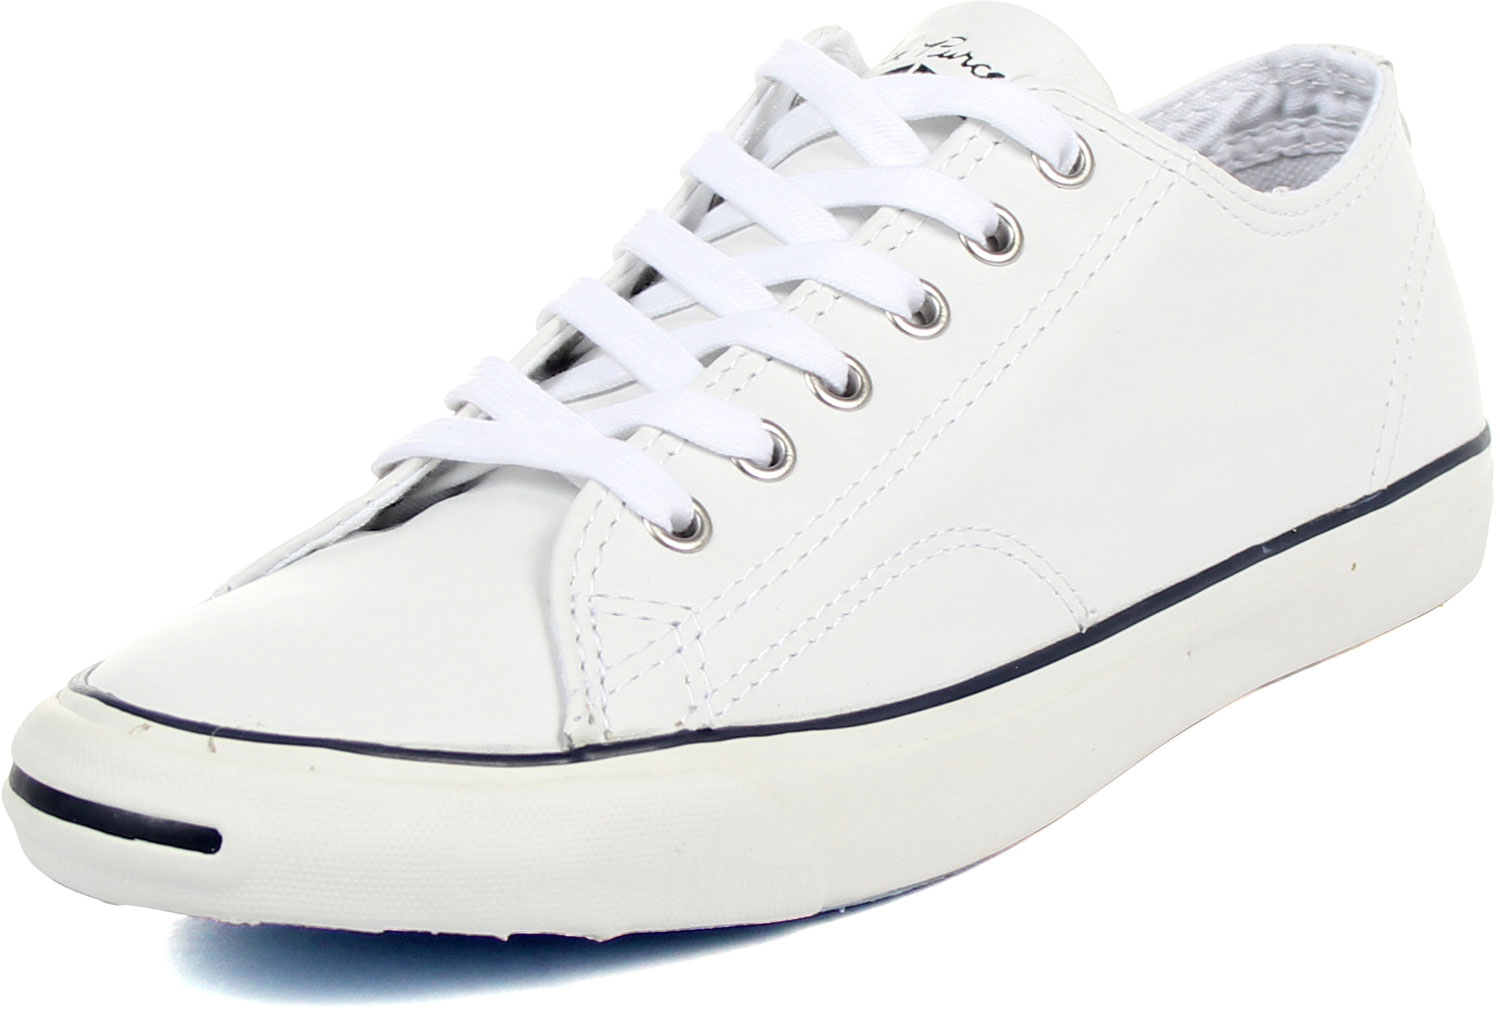 Converse Jack Purcel Raceround Leather Shoes in White